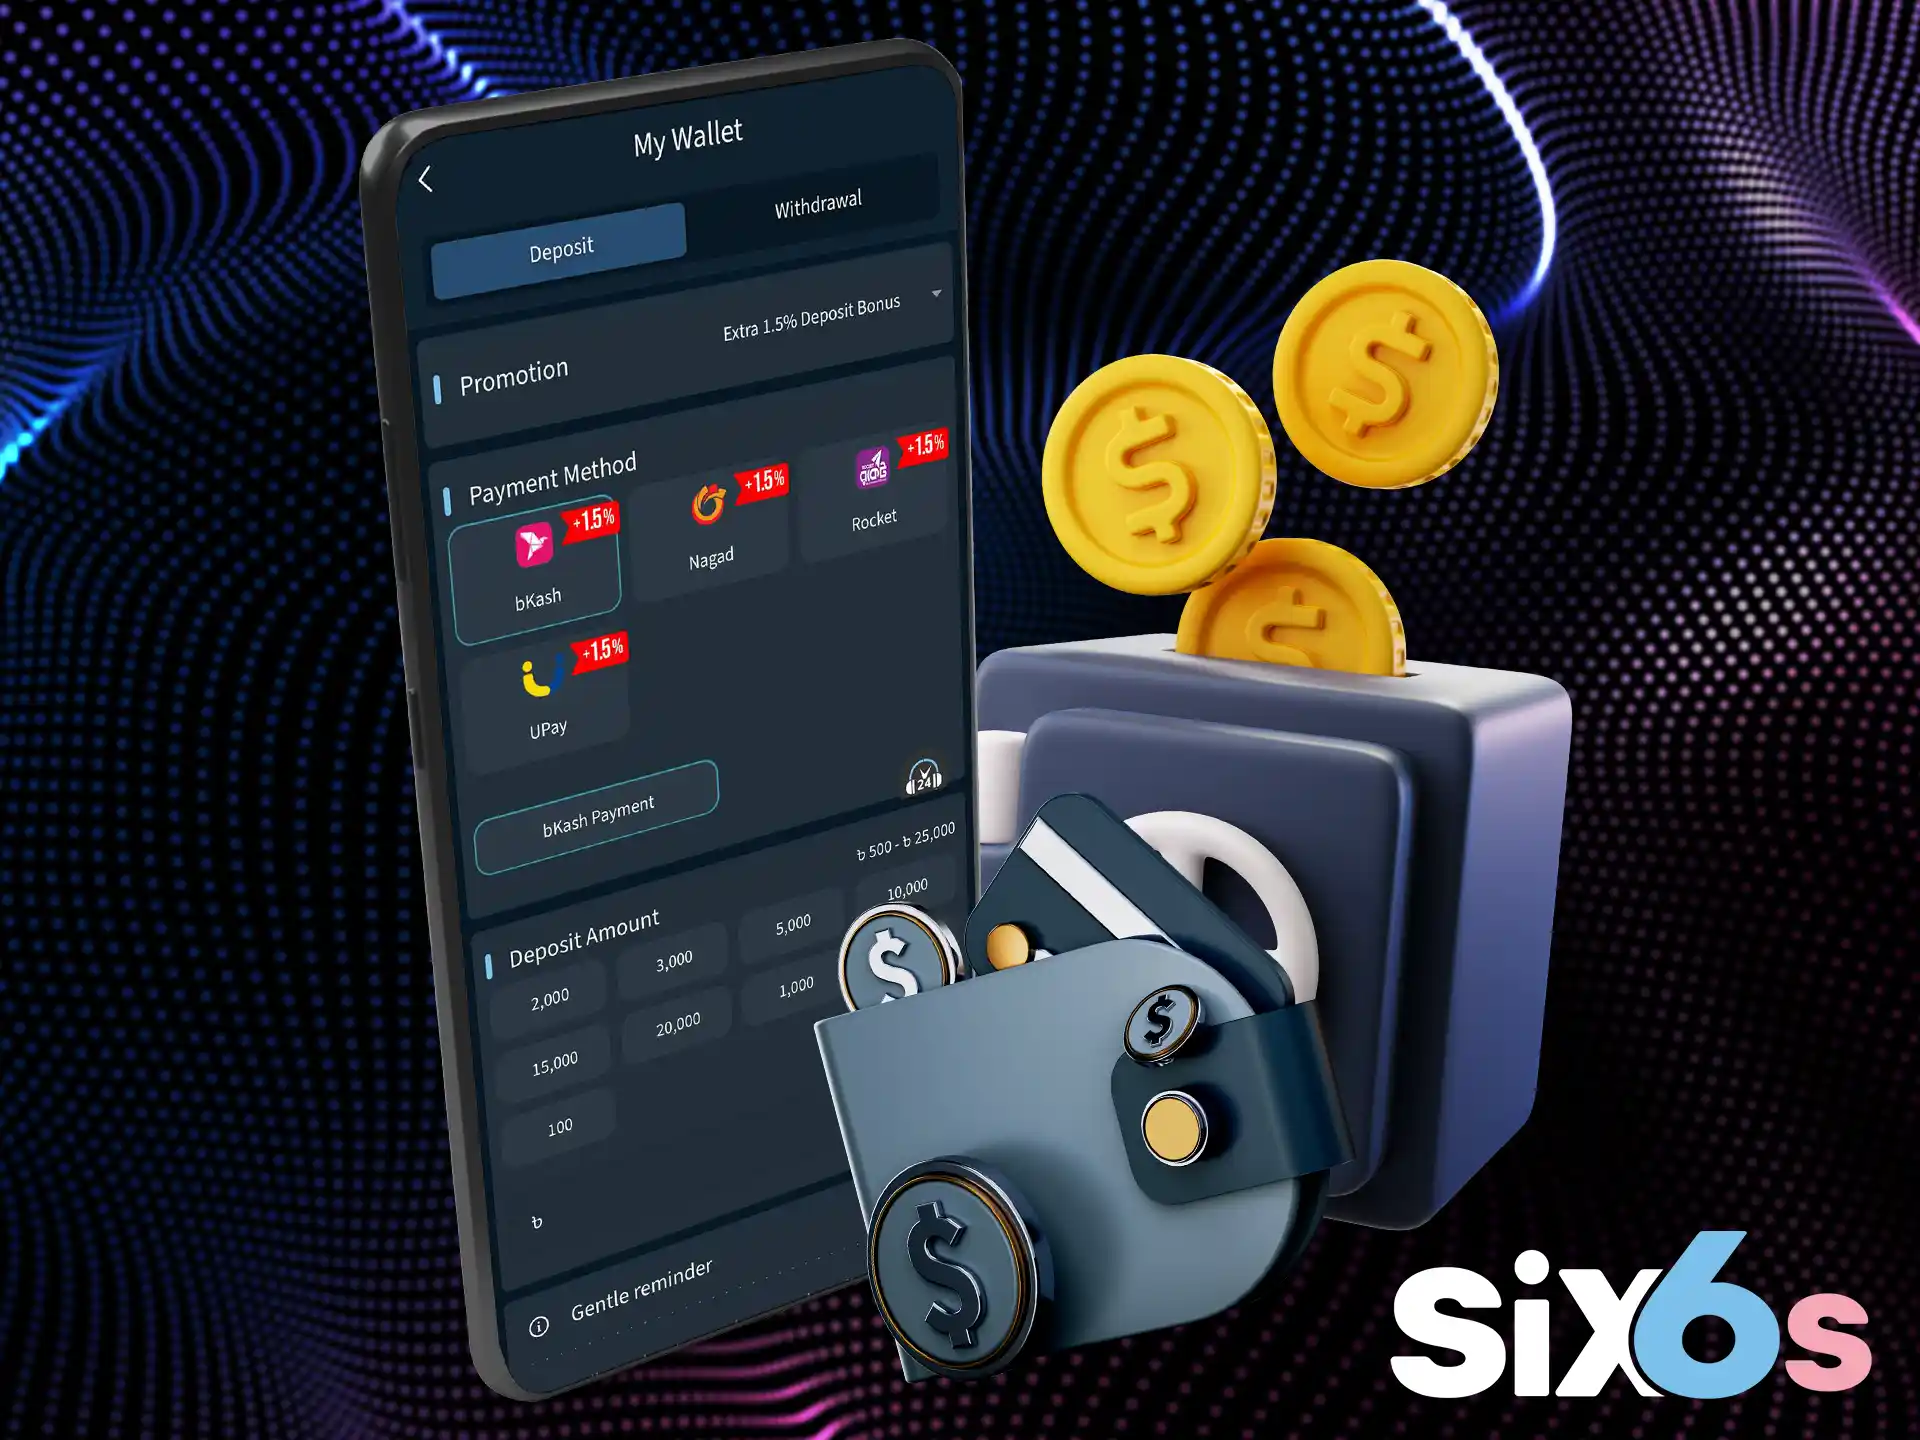 Six6s offers convenient and fast payments.